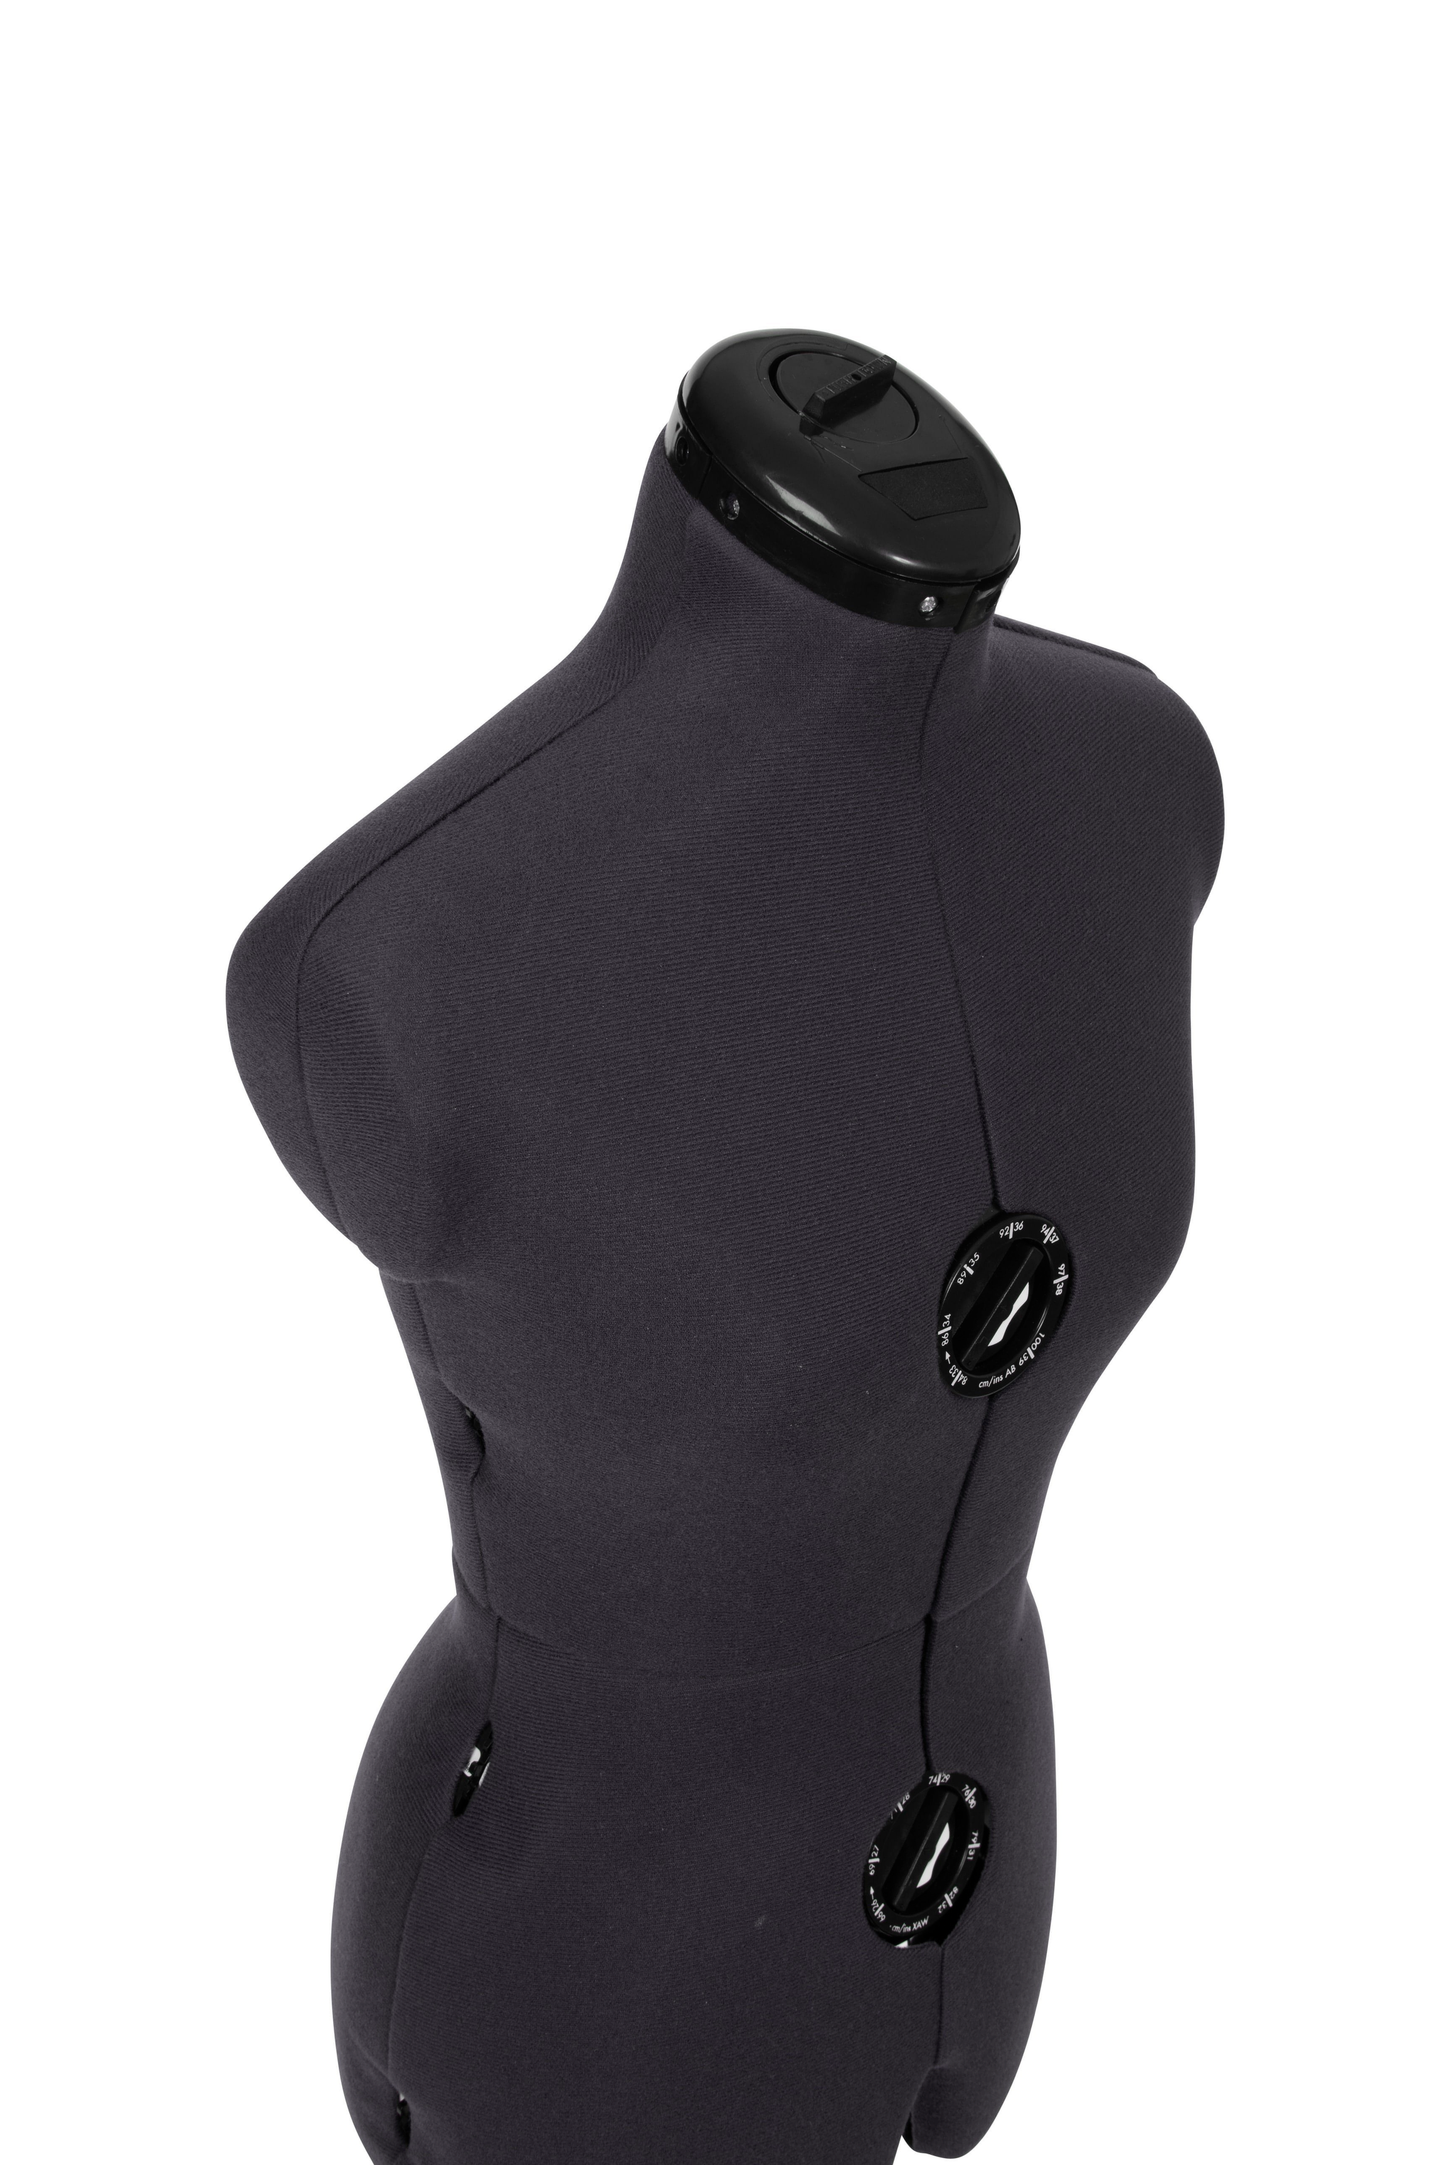 Adjustoform Tailormaid Heavy Duty Dress Form with 11 adjusters - Restocked A Grade - excellent condition